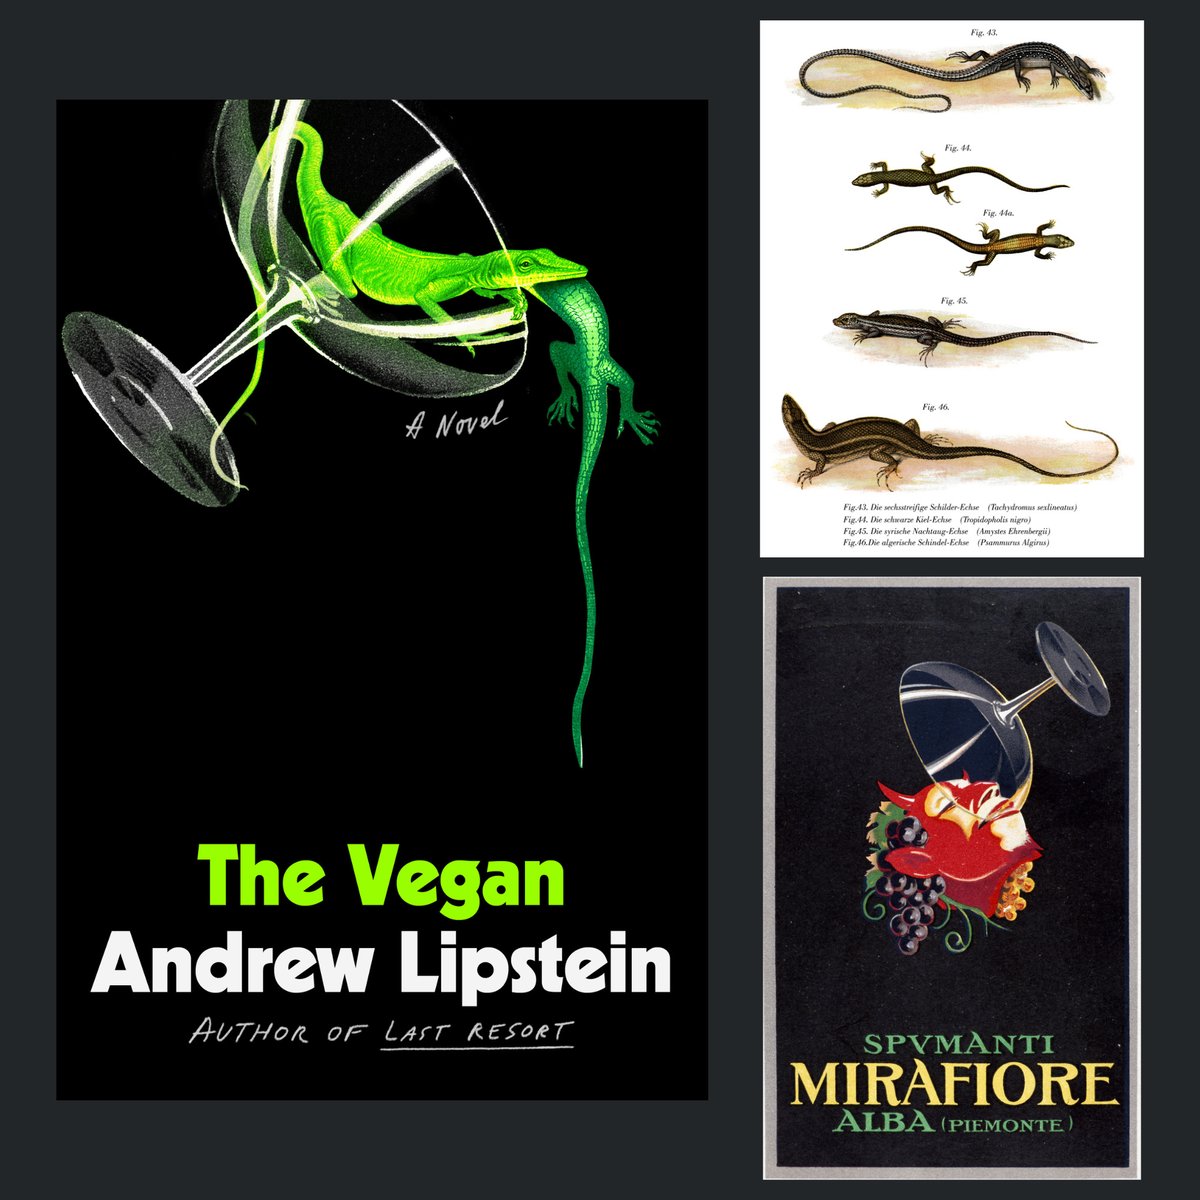 Cecilia R. Zhang - The Vegan by Andrew Lipstein. Published by FSG, United States. 